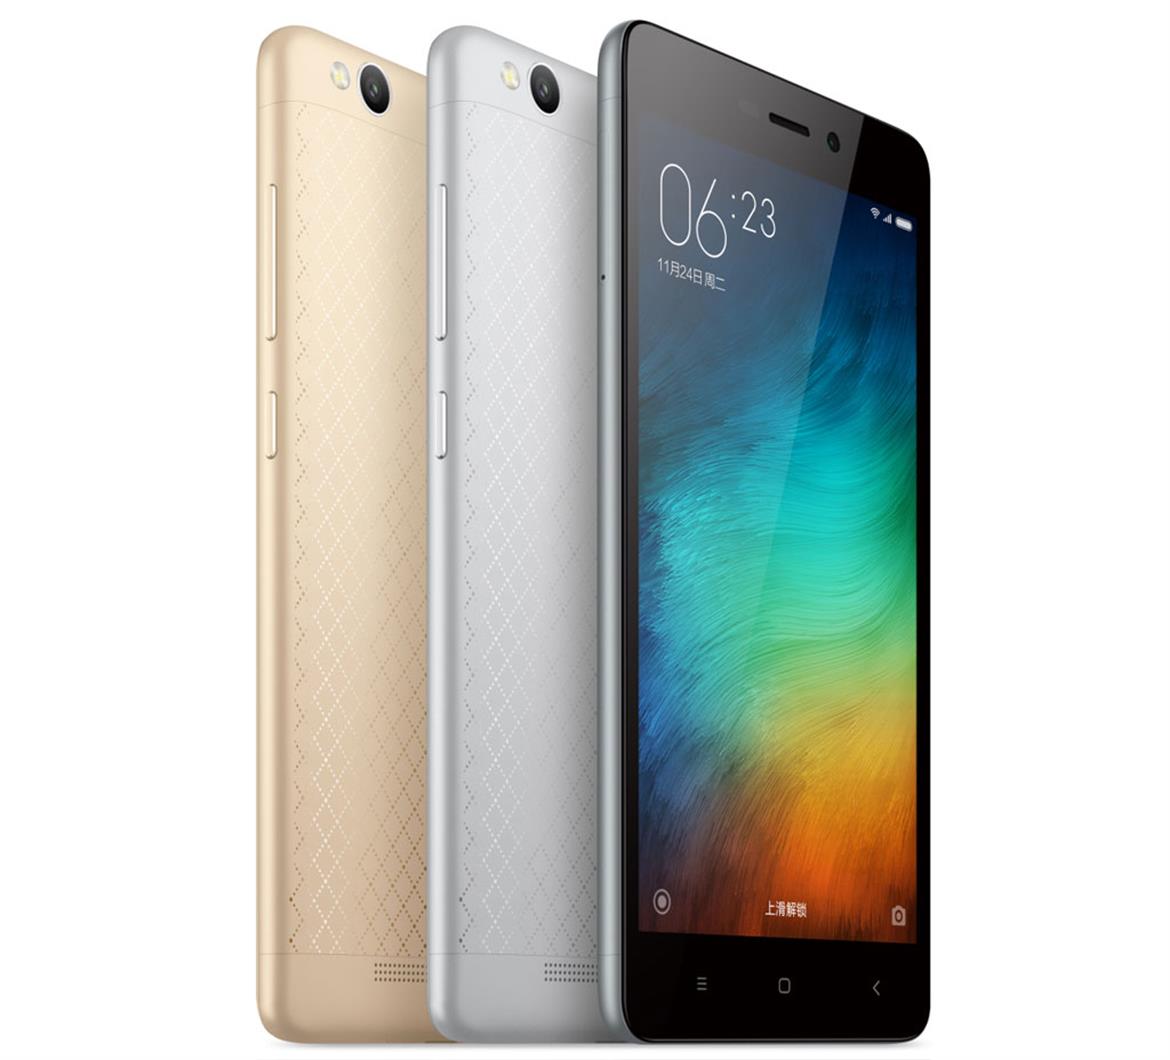 Xiaomi Redmi 3 Is A $107 Metal-Bodied Android Smartphone With Capacious 4100mAh Battery